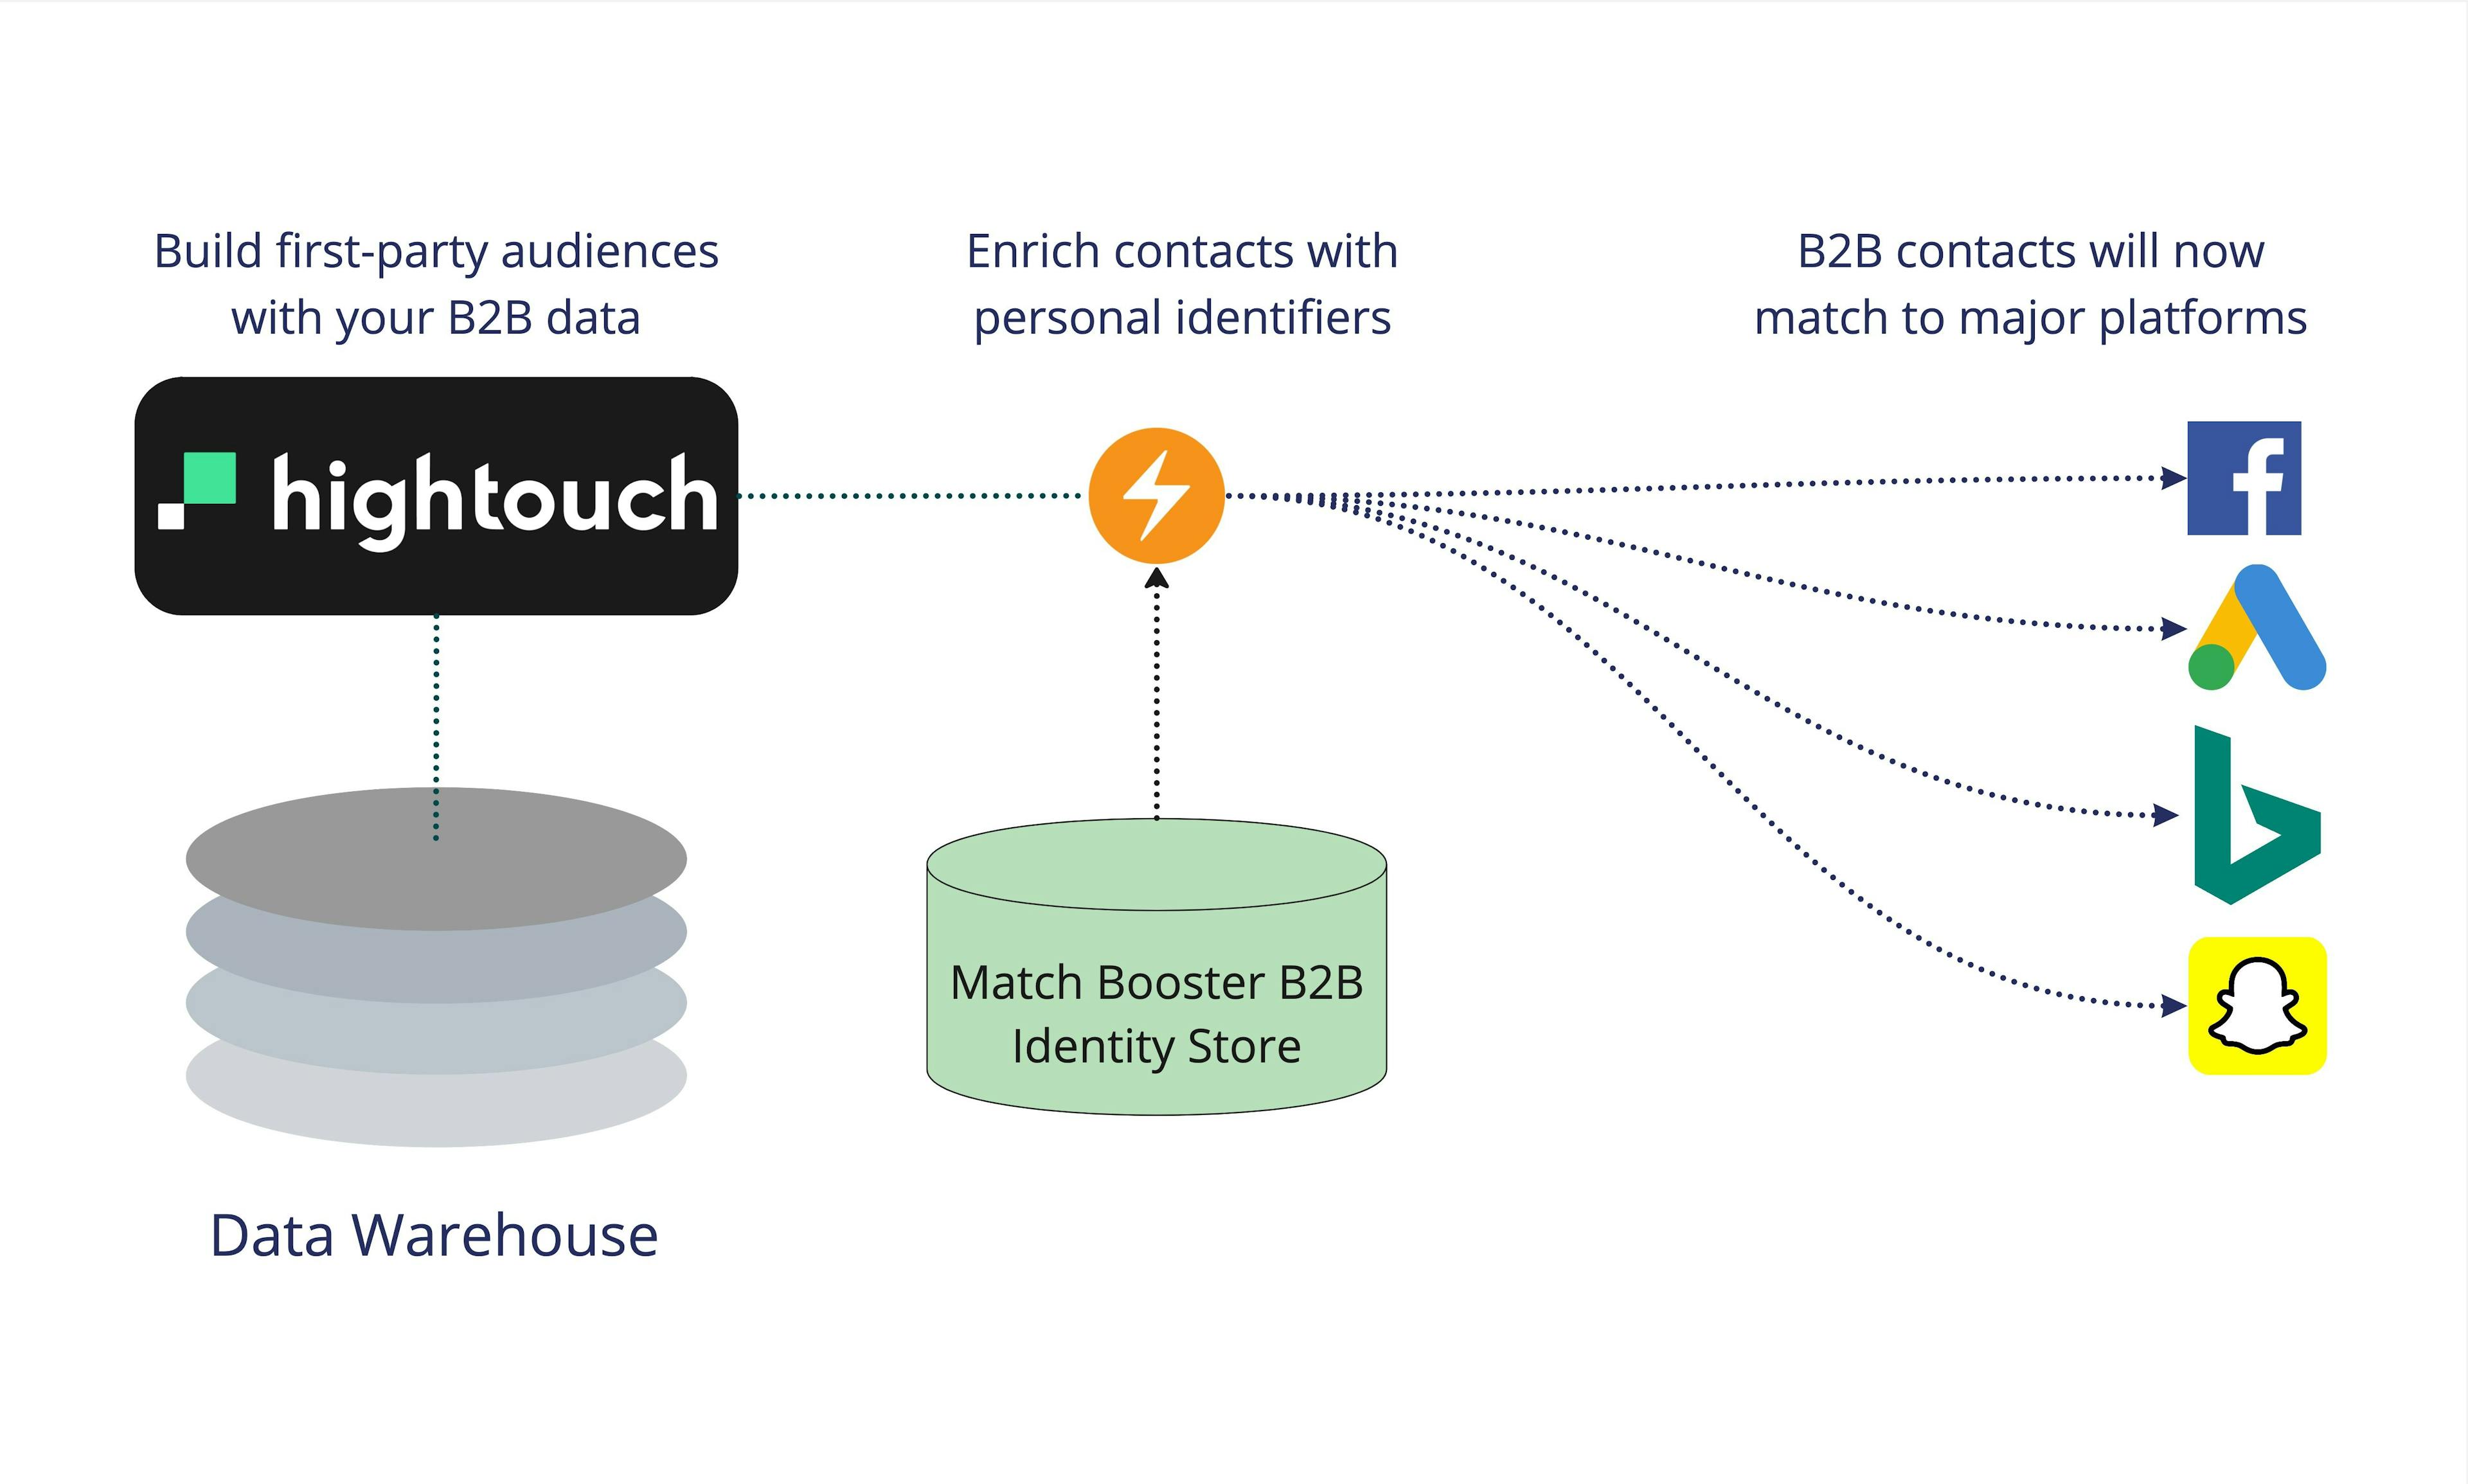 Match Booster enriches data in flight to ad platforms